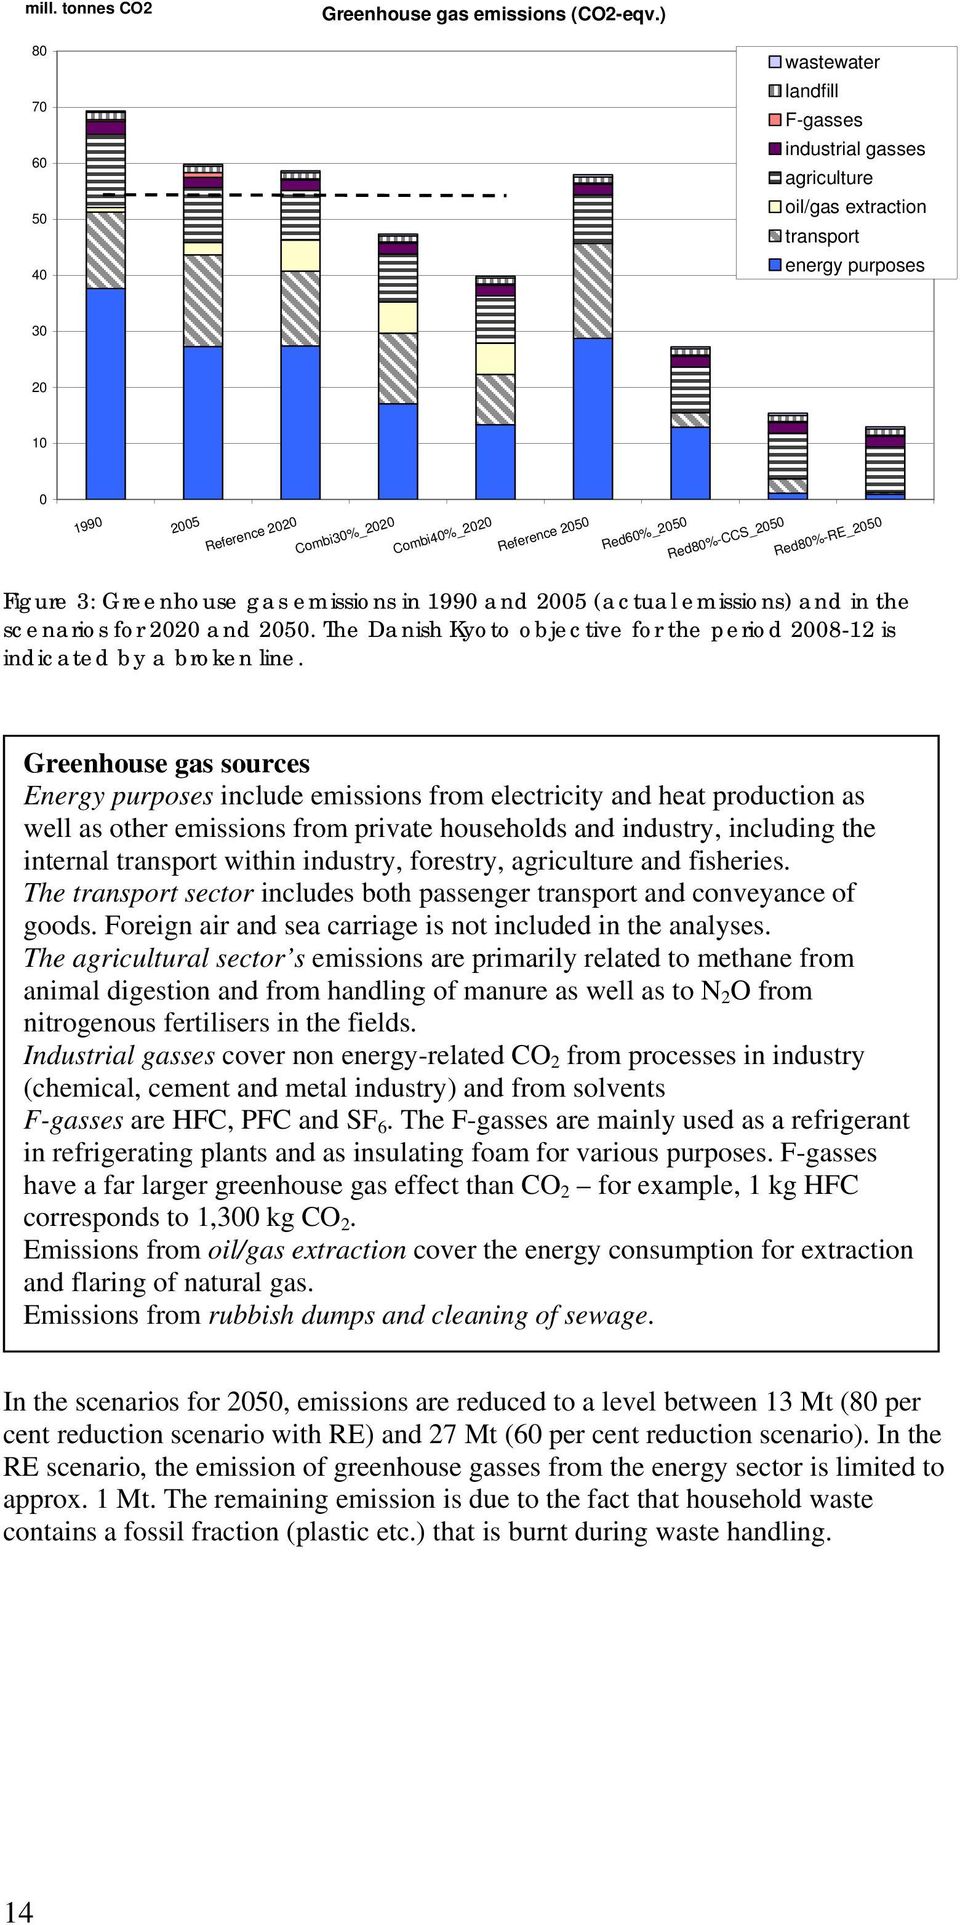 Red60%_2050 Red80%-CCS_2050 Red80%-RE_2050 Figure 3: Greenhouse gas emissions in 1990 and 2005 (actual emissions) and in the scenarios for 2020 and 2050.